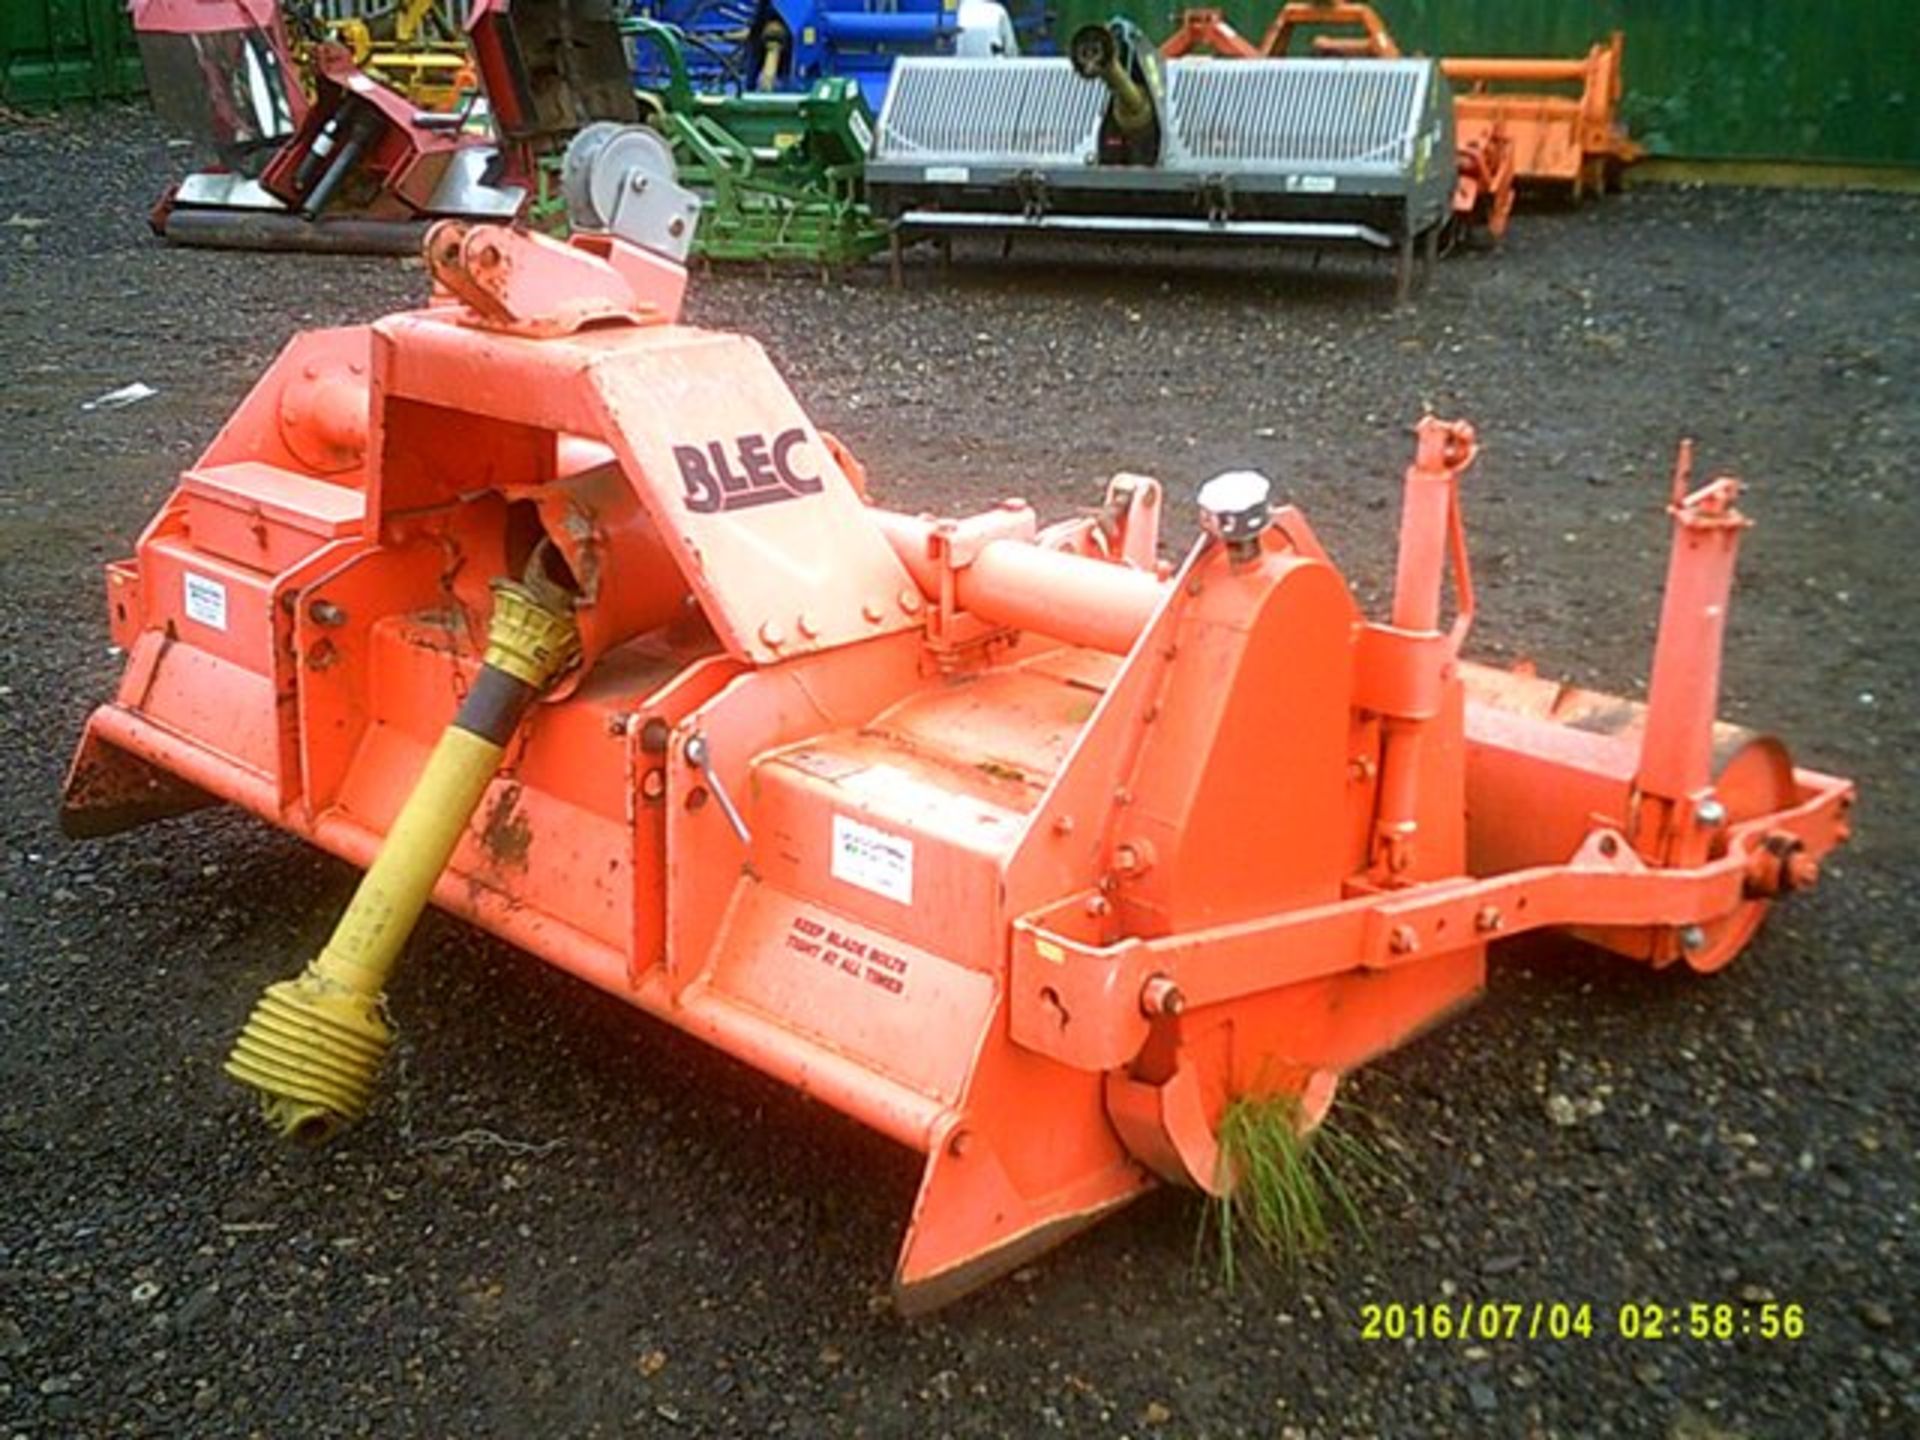 Blec BV180 MD medium duty stone burier. Serial no. 050289, year 2011 (remanufactured) - Image 4 of 7